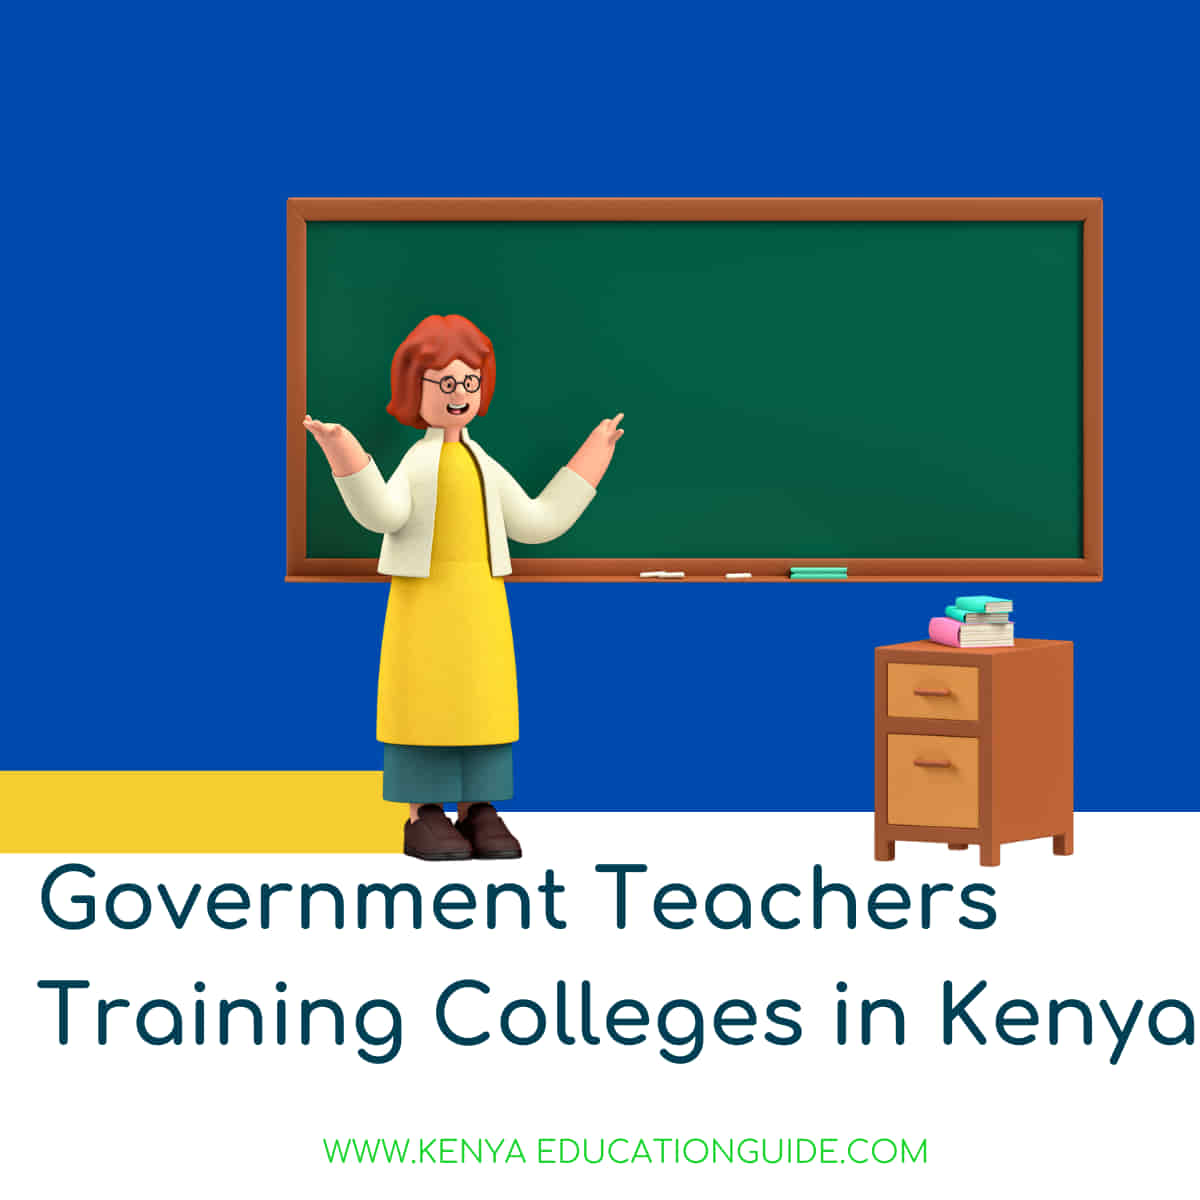 Government teachers training colleges in Kenya